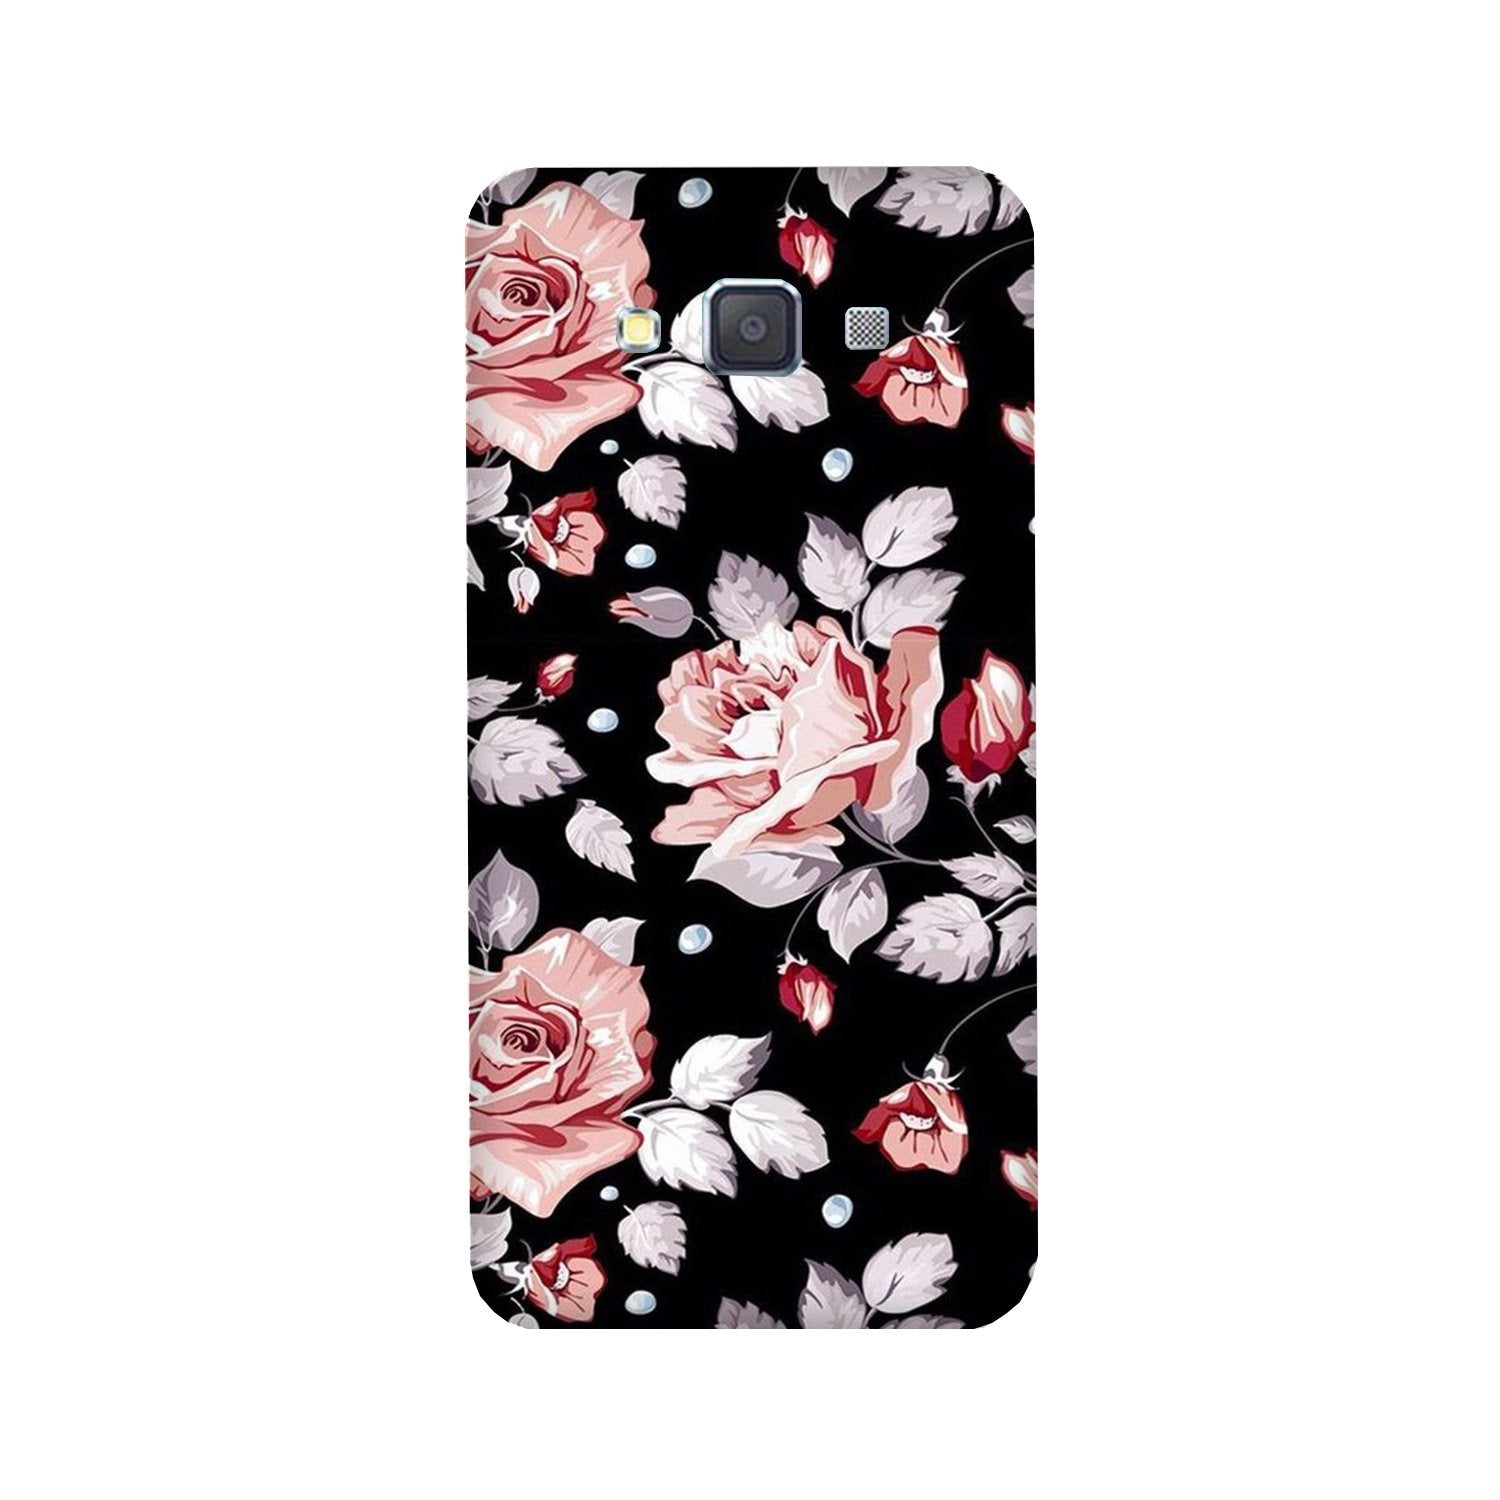 Pink rose Case for Galaxy ON7/ON7 Pro